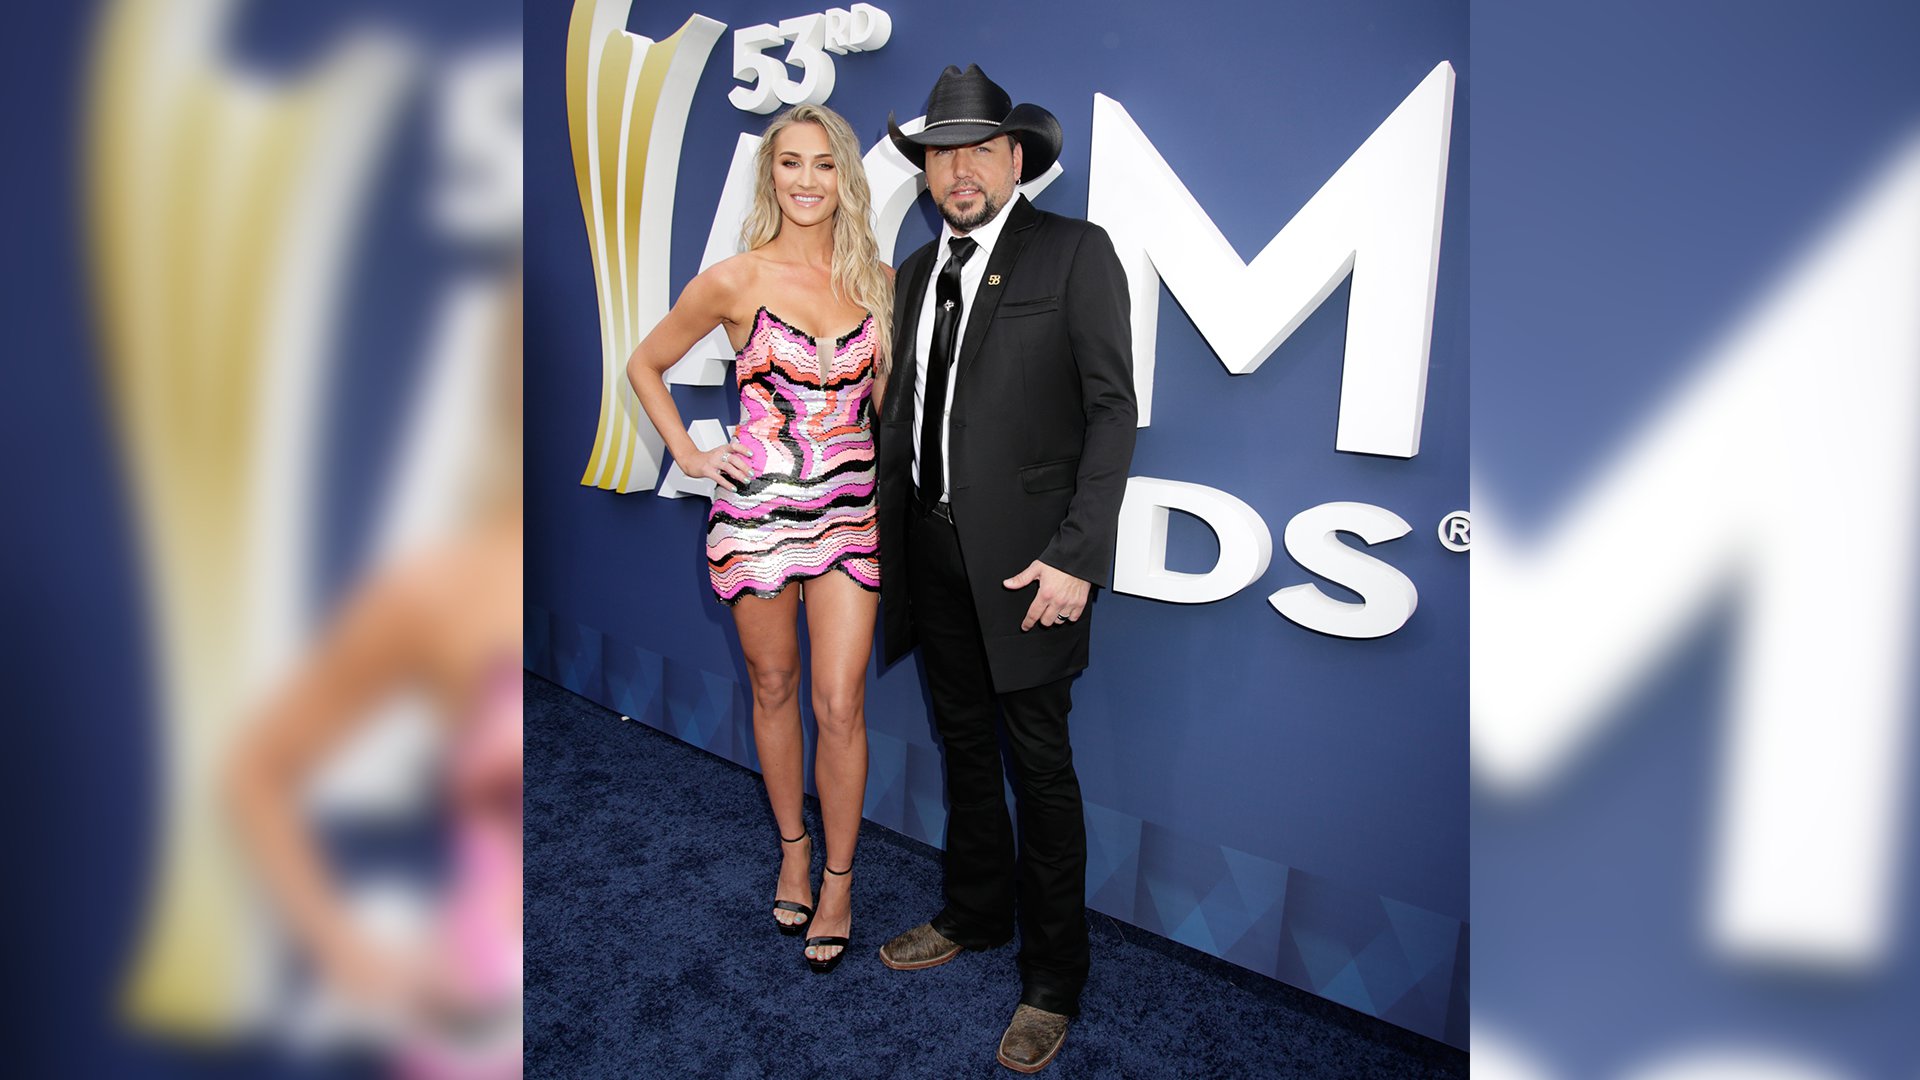 Jason Aldean returns to Las Vegas with his wife Brittany for the 53rd ACM Awards.